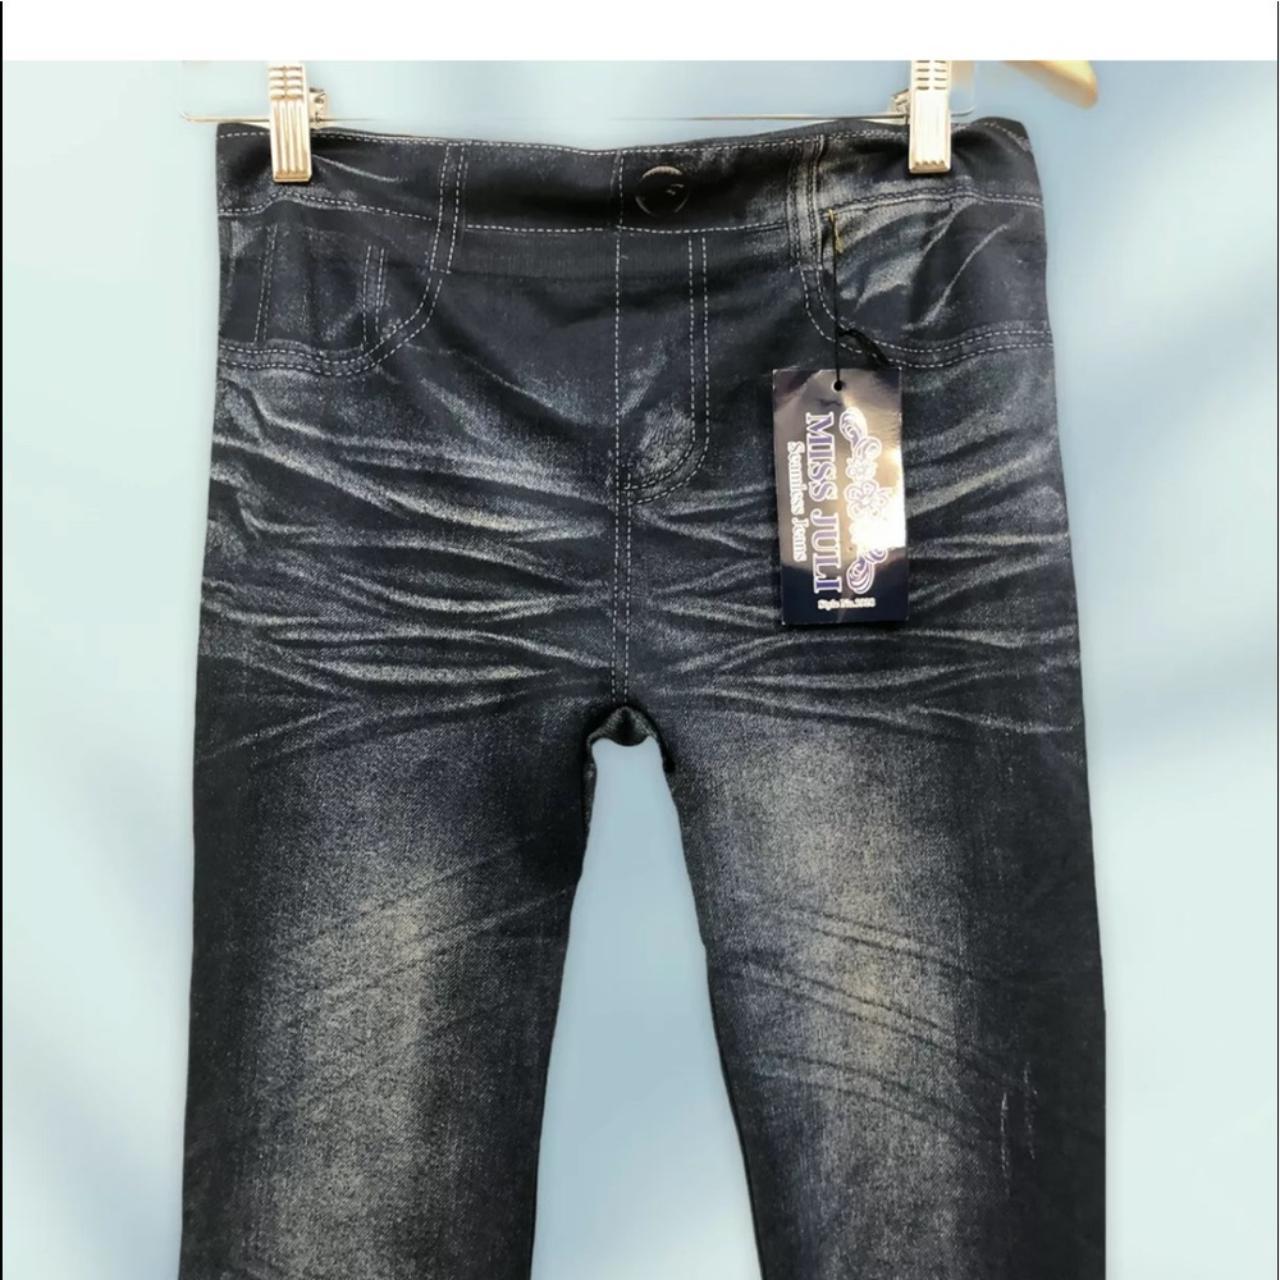 Product Image 2 - Miss juli s/m
Love that jeans